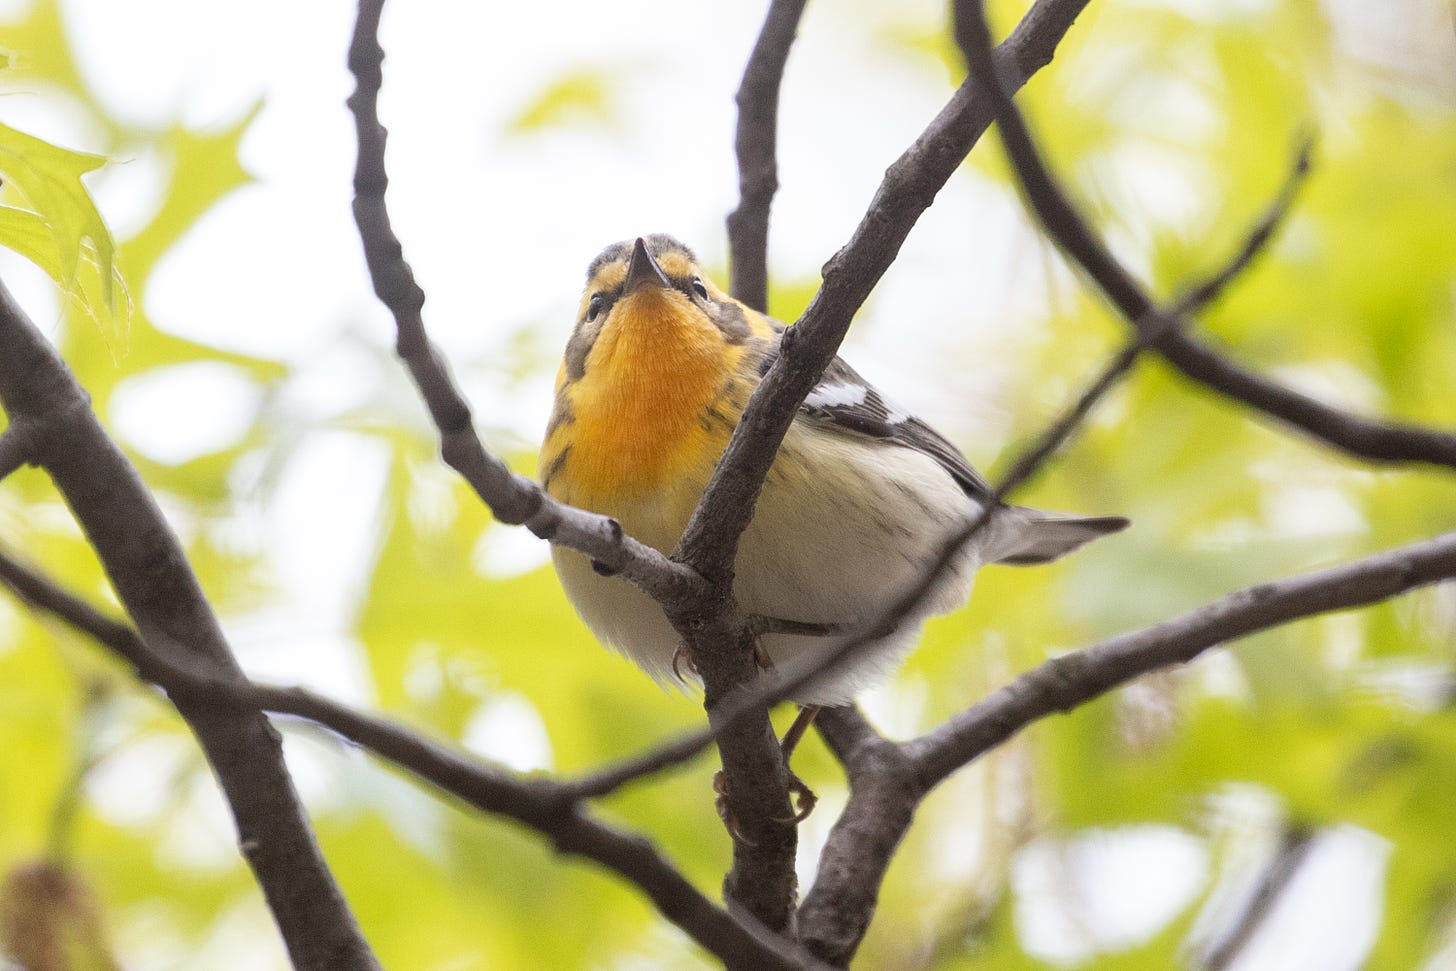 a small songbird with an orange throat and face, black mask and cap, white belly, streaked flanks, dark wings, and white wing bars. the bird is viewed up close but from below, and is perching in twigs looking down at the viewer.